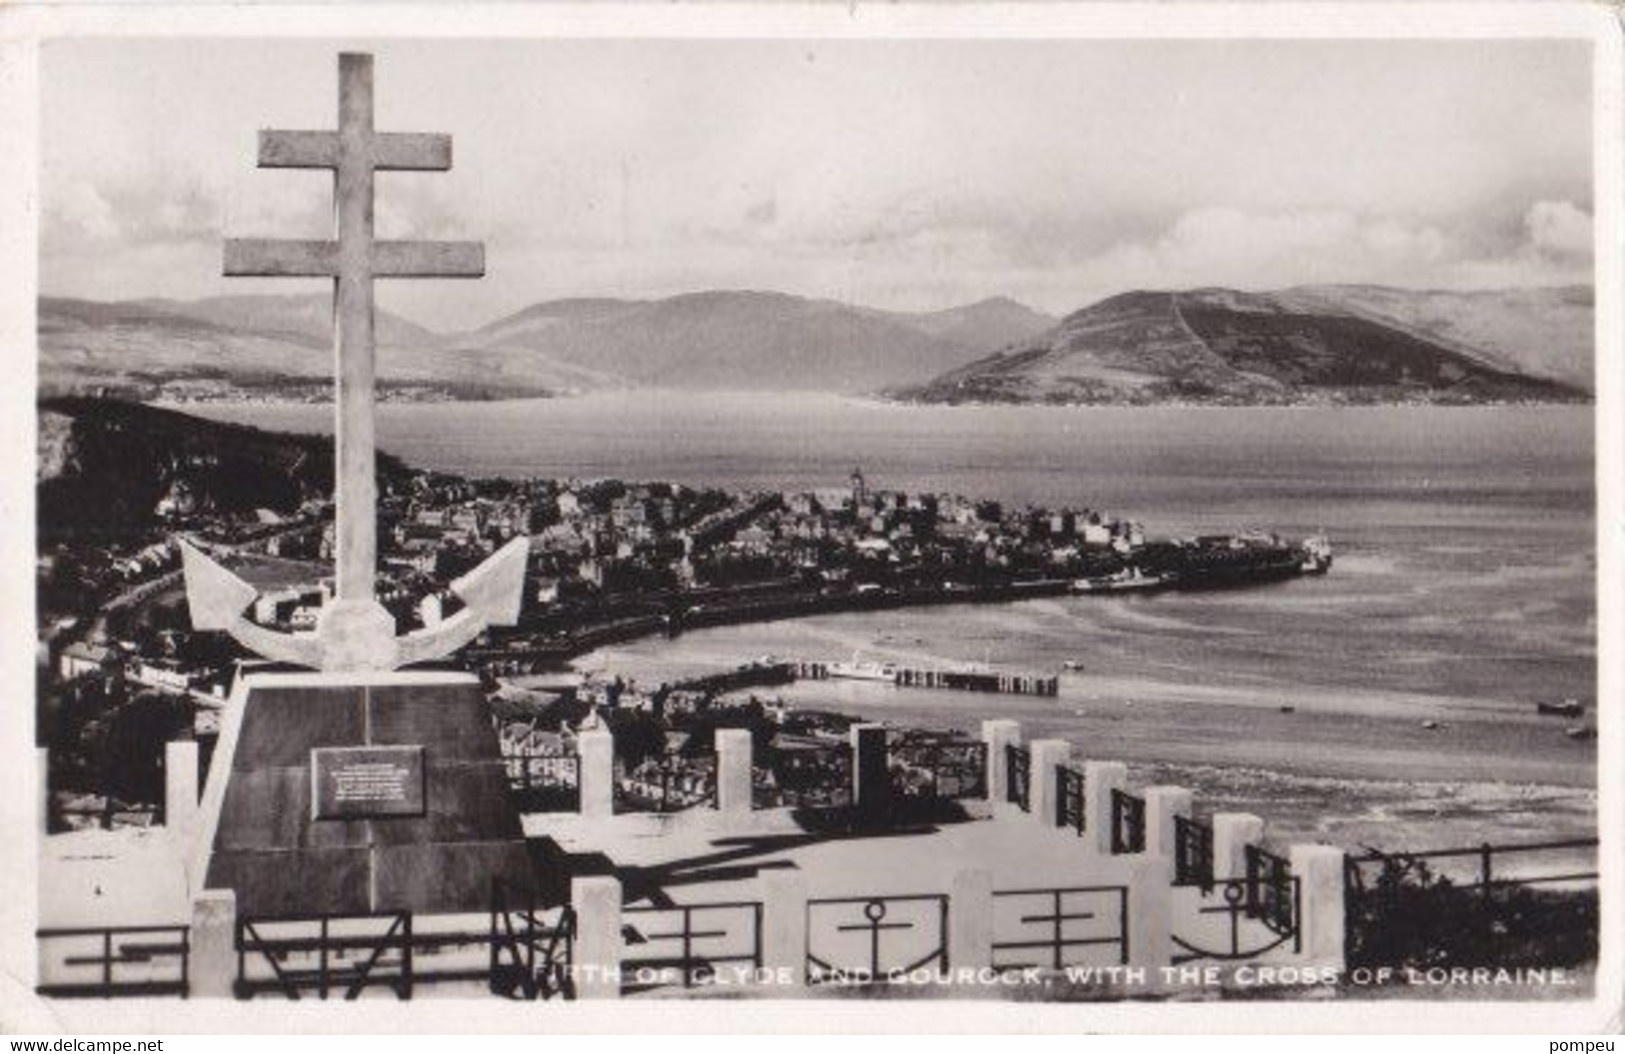 QN - FIRTH Of CLYDE And Rourock, With The Cross Of Lorraine - 1959 - Renfrewshire